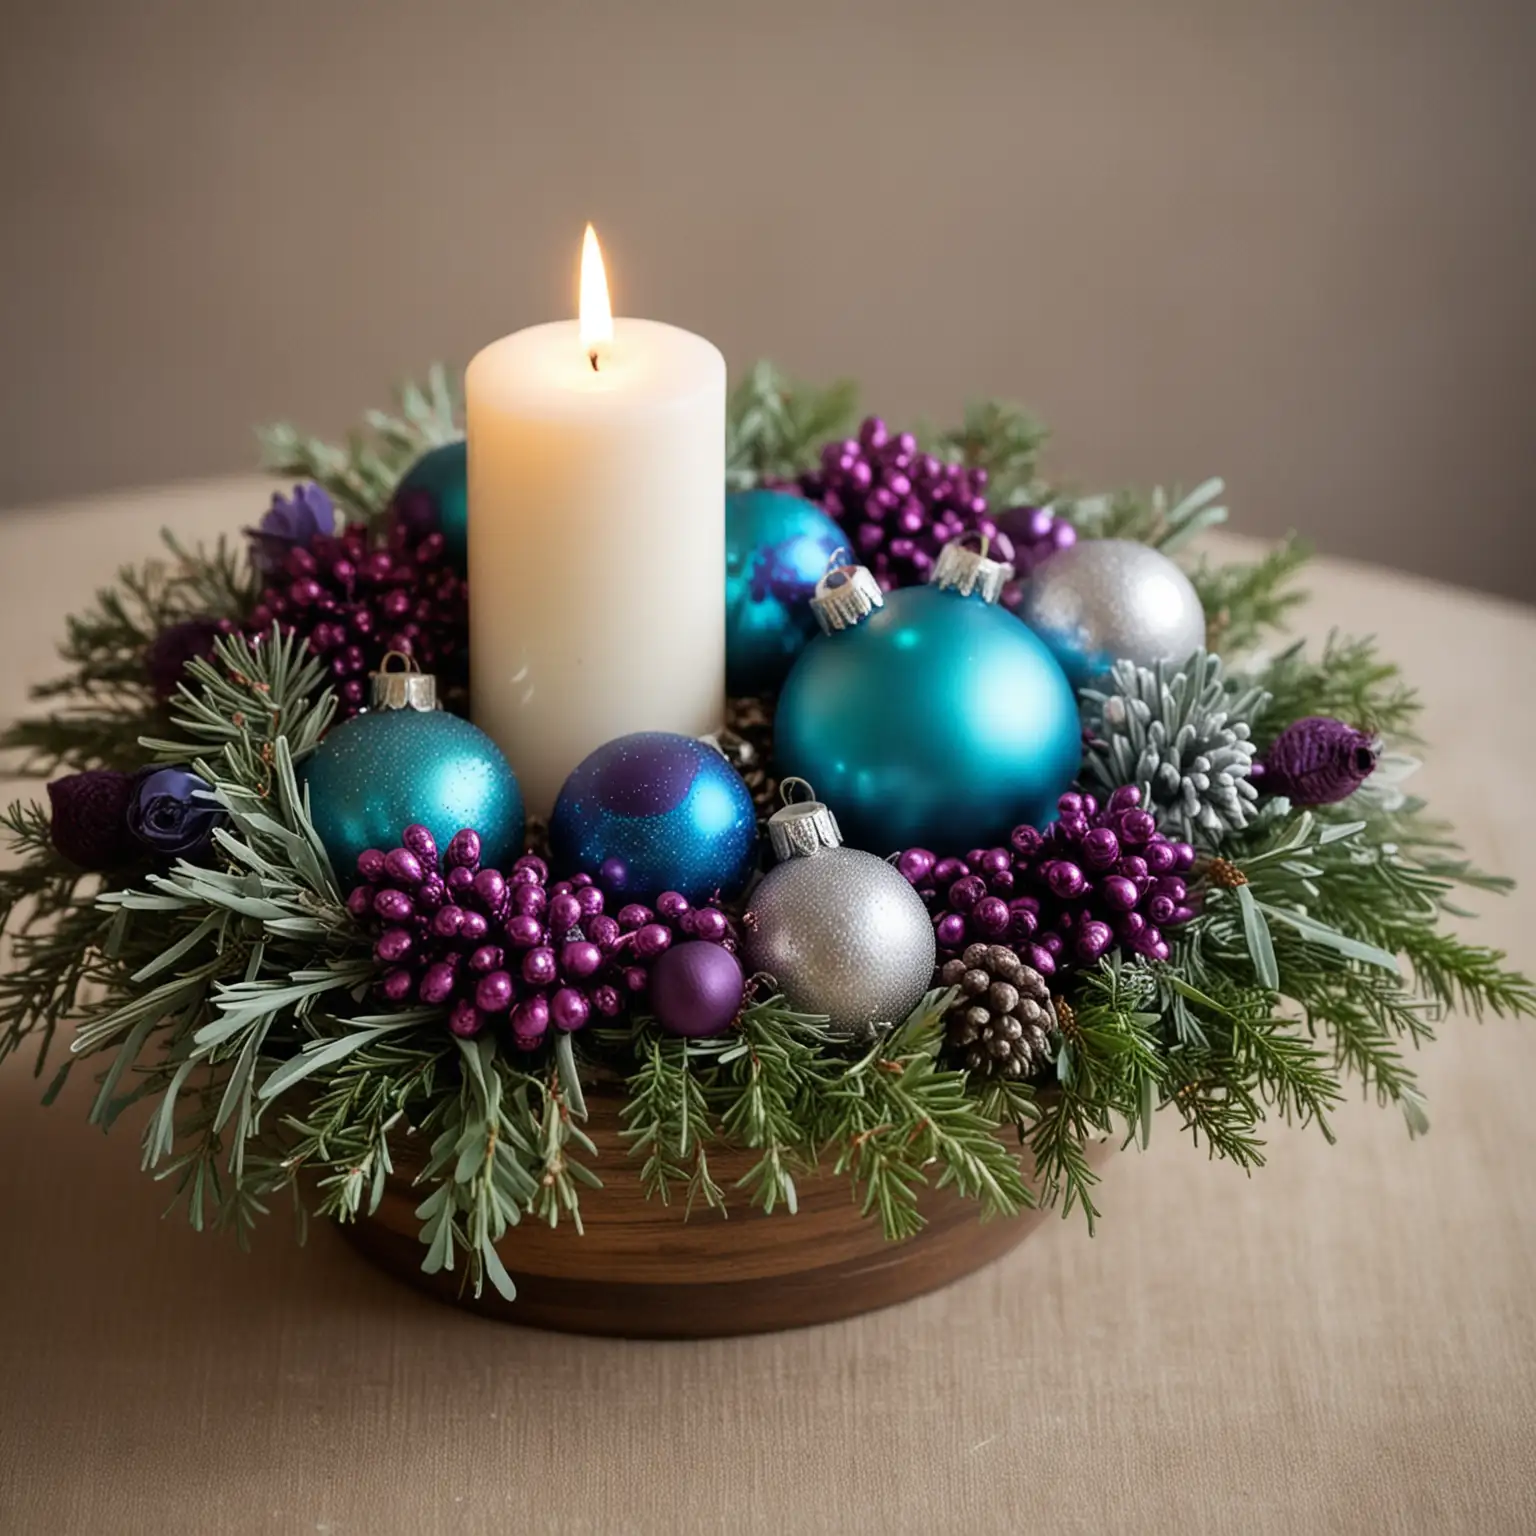 simple boho winter wedding centerpiece with turquoise and purple accents and ornaments; nothing else in photo; keep background neutral